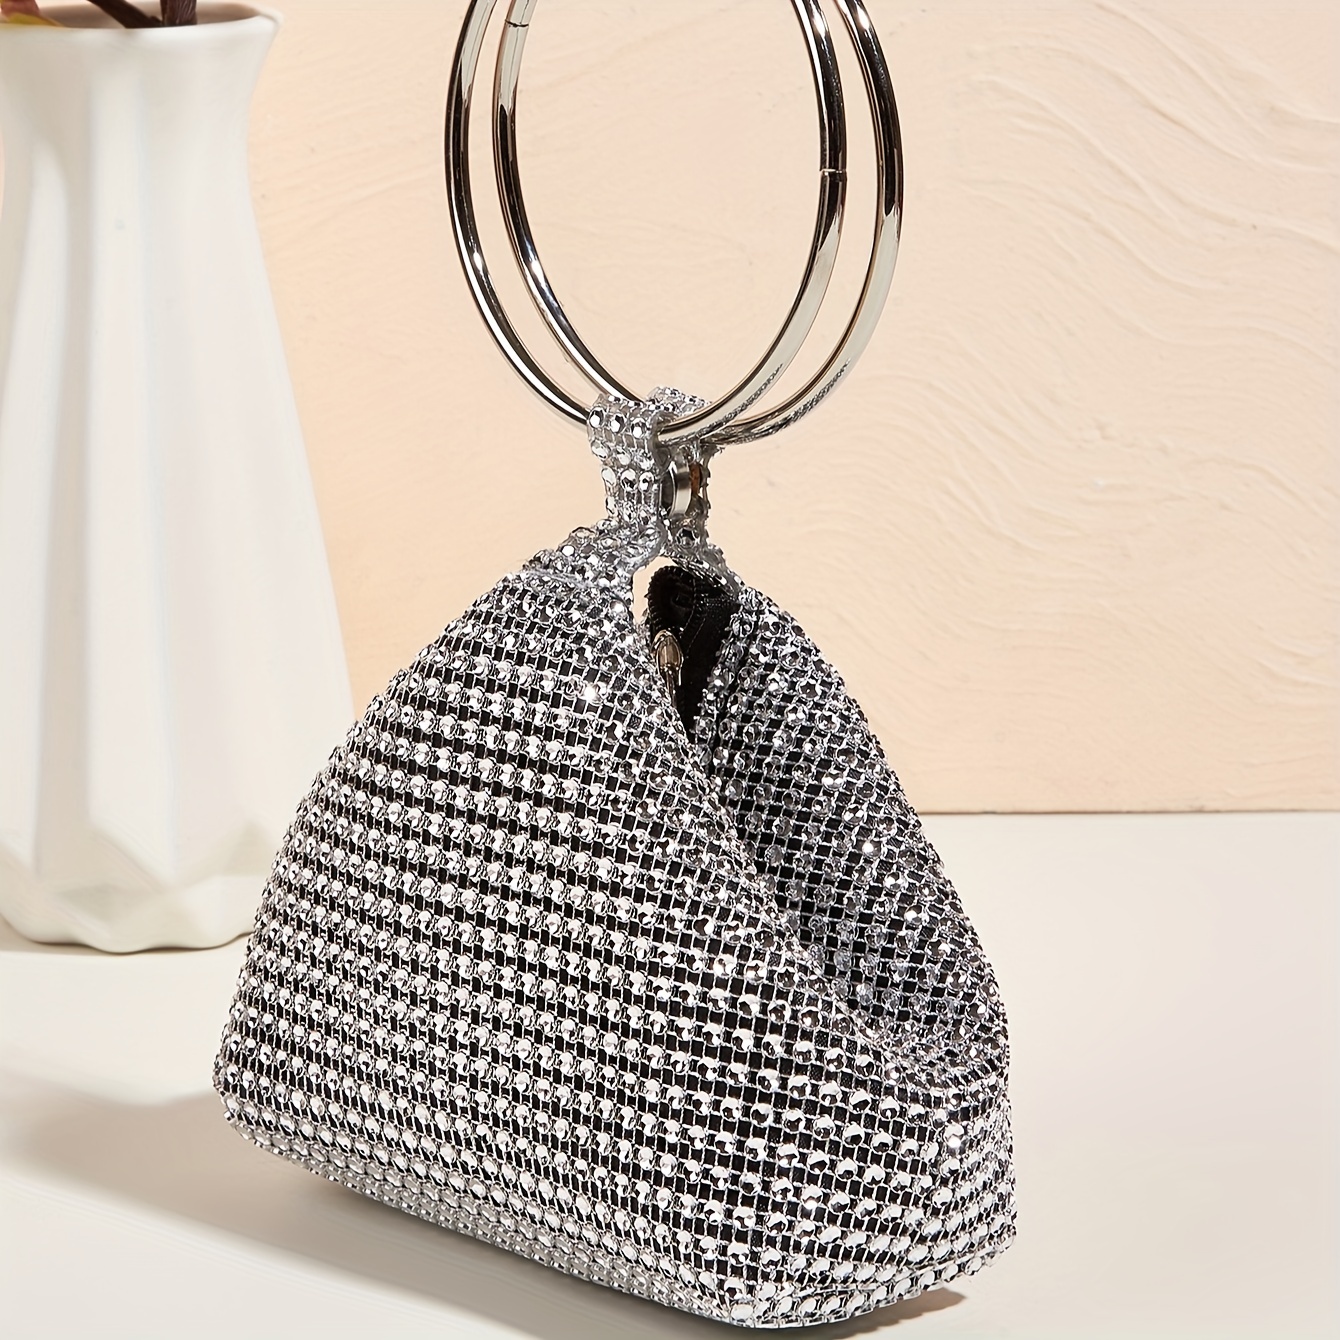 Round Top Handle Silver Glitter Bag